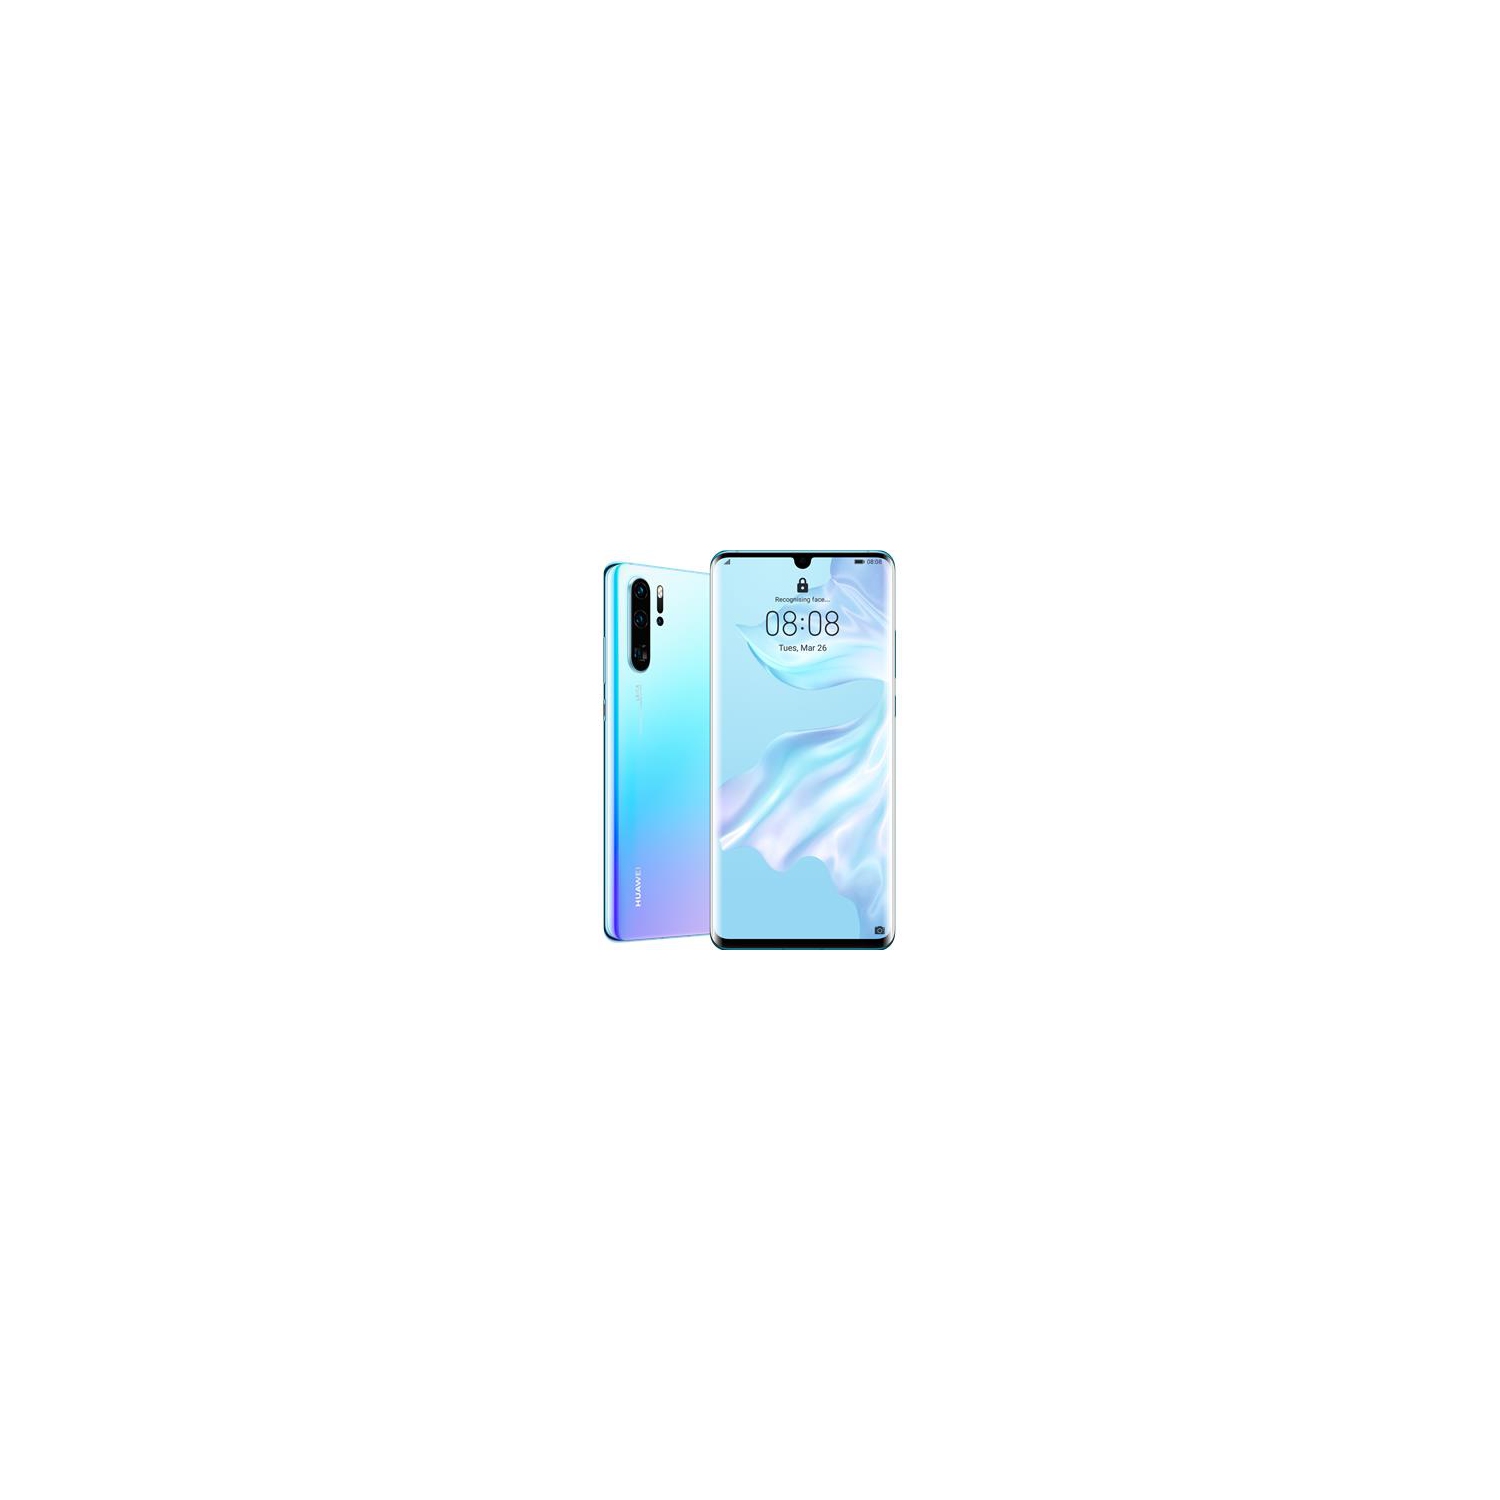 Refurbished (Excellent) - Huawei P30 Pro 128GB Smartphone - Breathing Crystal - Unlocked - Certified Pre-Owned